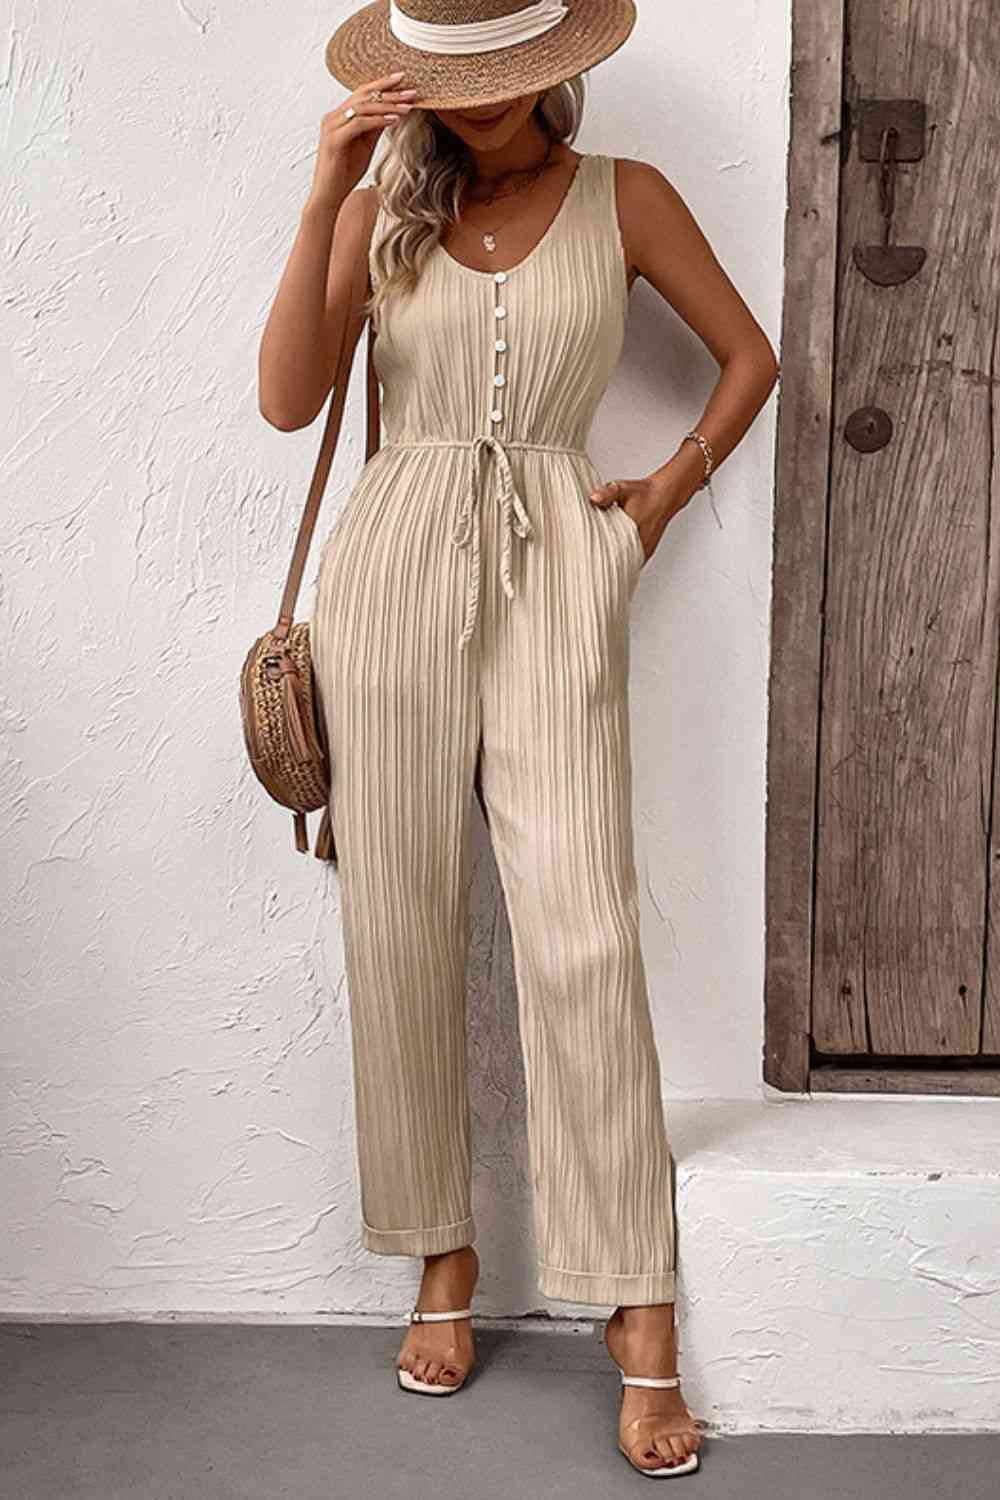 Textured Sleeveless Jumpsuit with Pockets - Scarlett's Riverside Boutique 